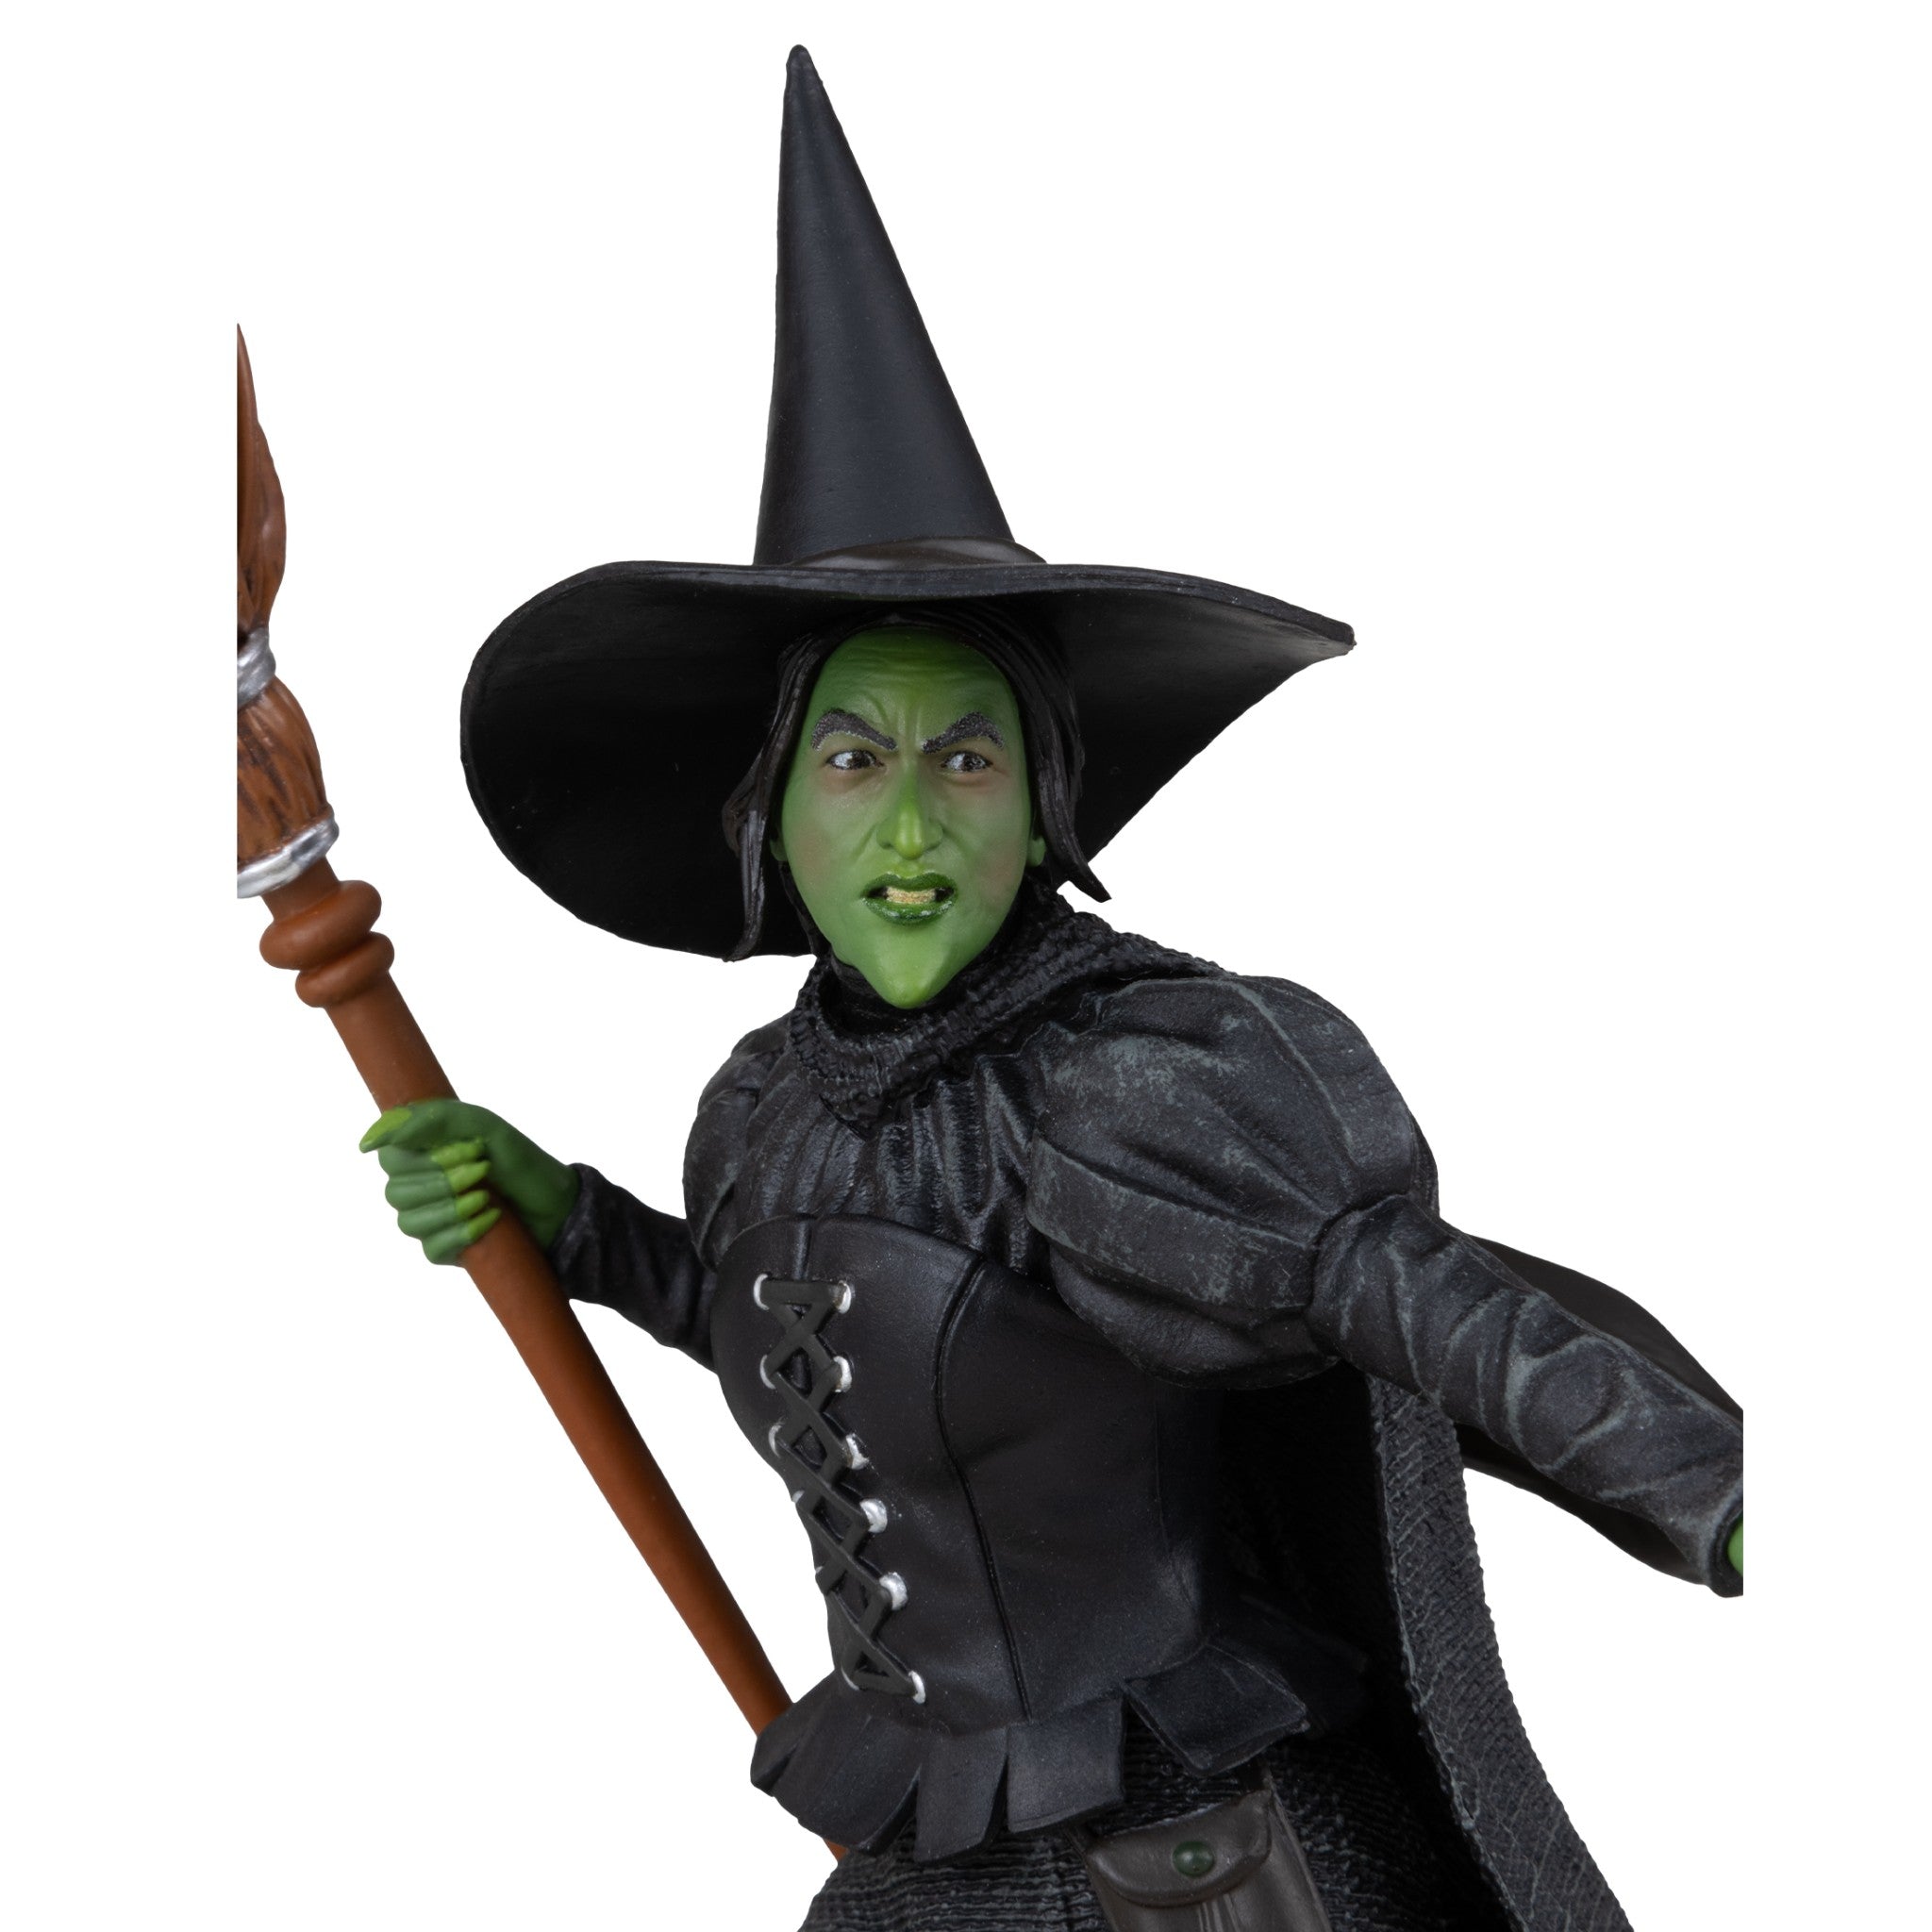 Movie Maniacs Wicked Witch of the West WB100 Anniversary 6" Limited - McFarlane